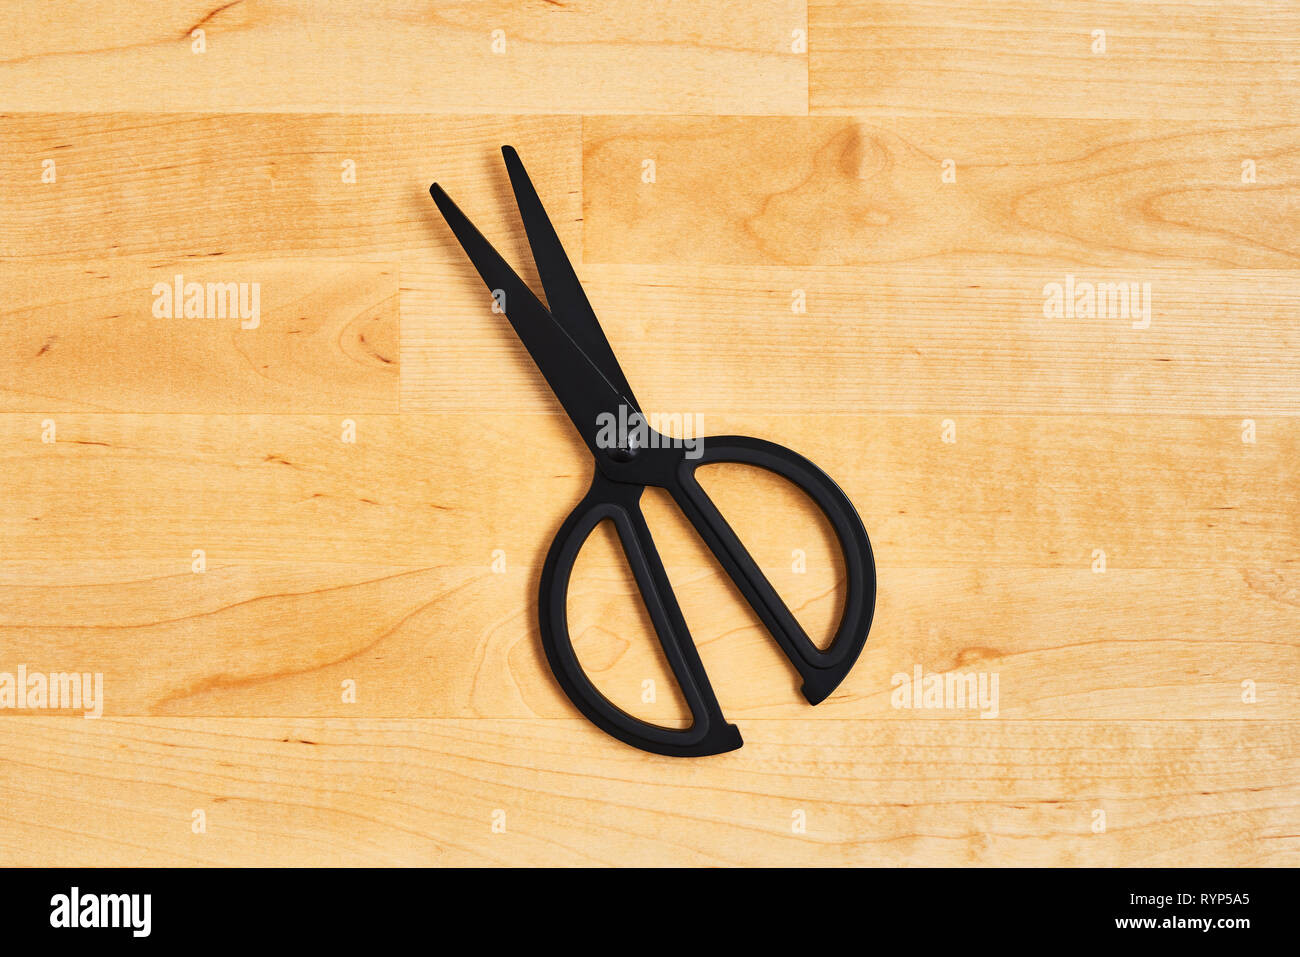 Black scissors on yellow wooden table. Top view. Copy space for text or design. Stock Photo